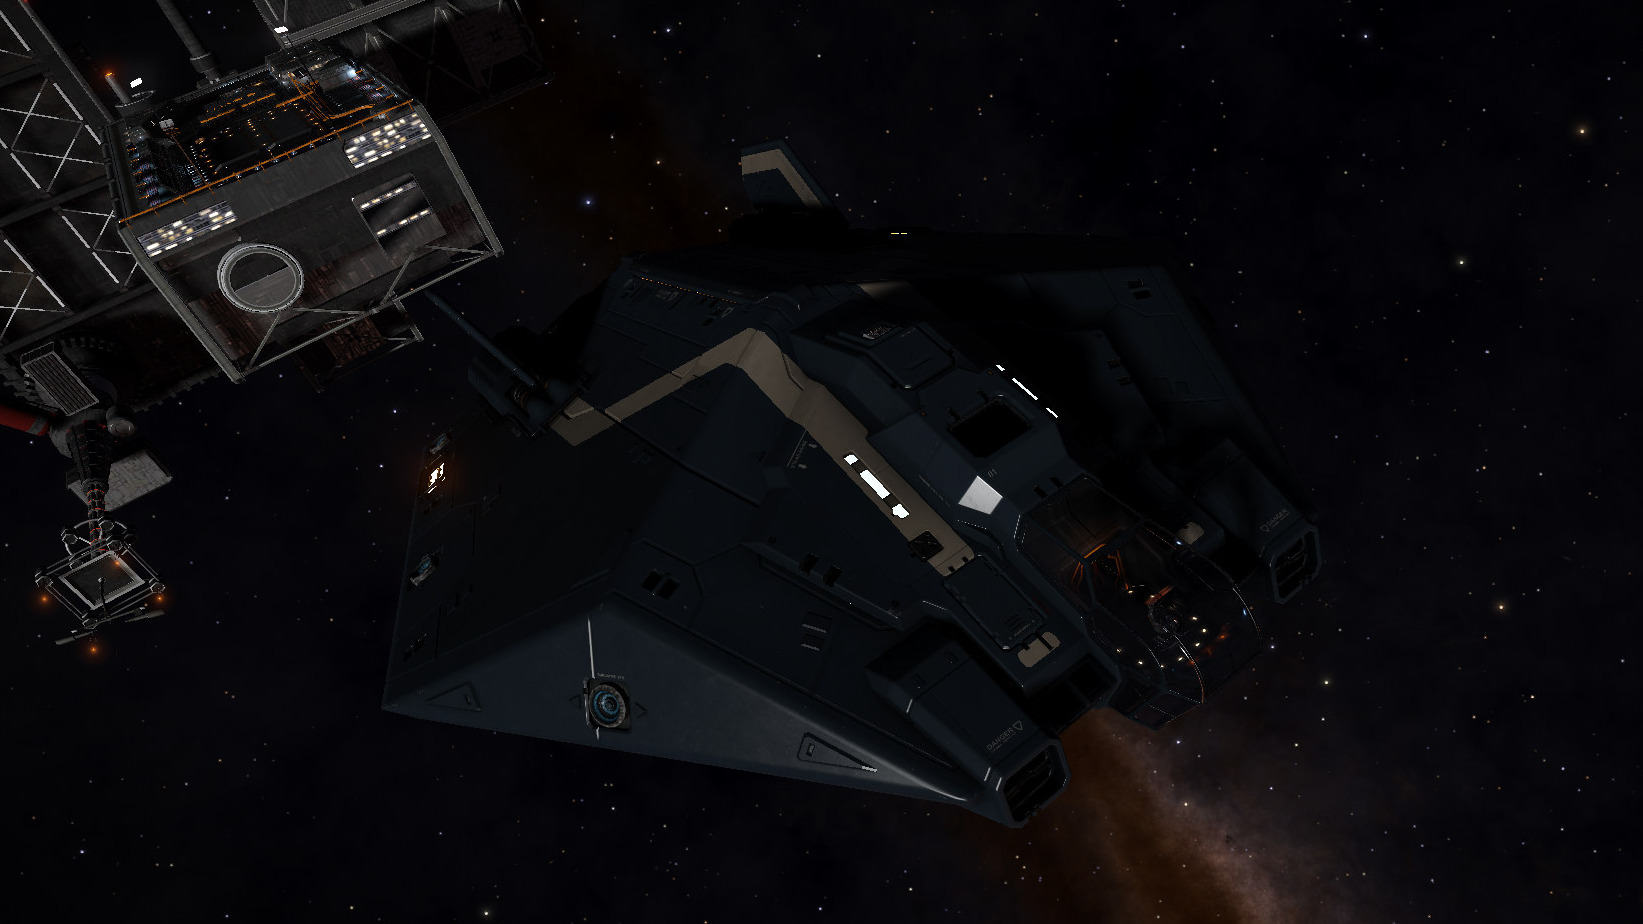 ASP leaving an Outpost ...